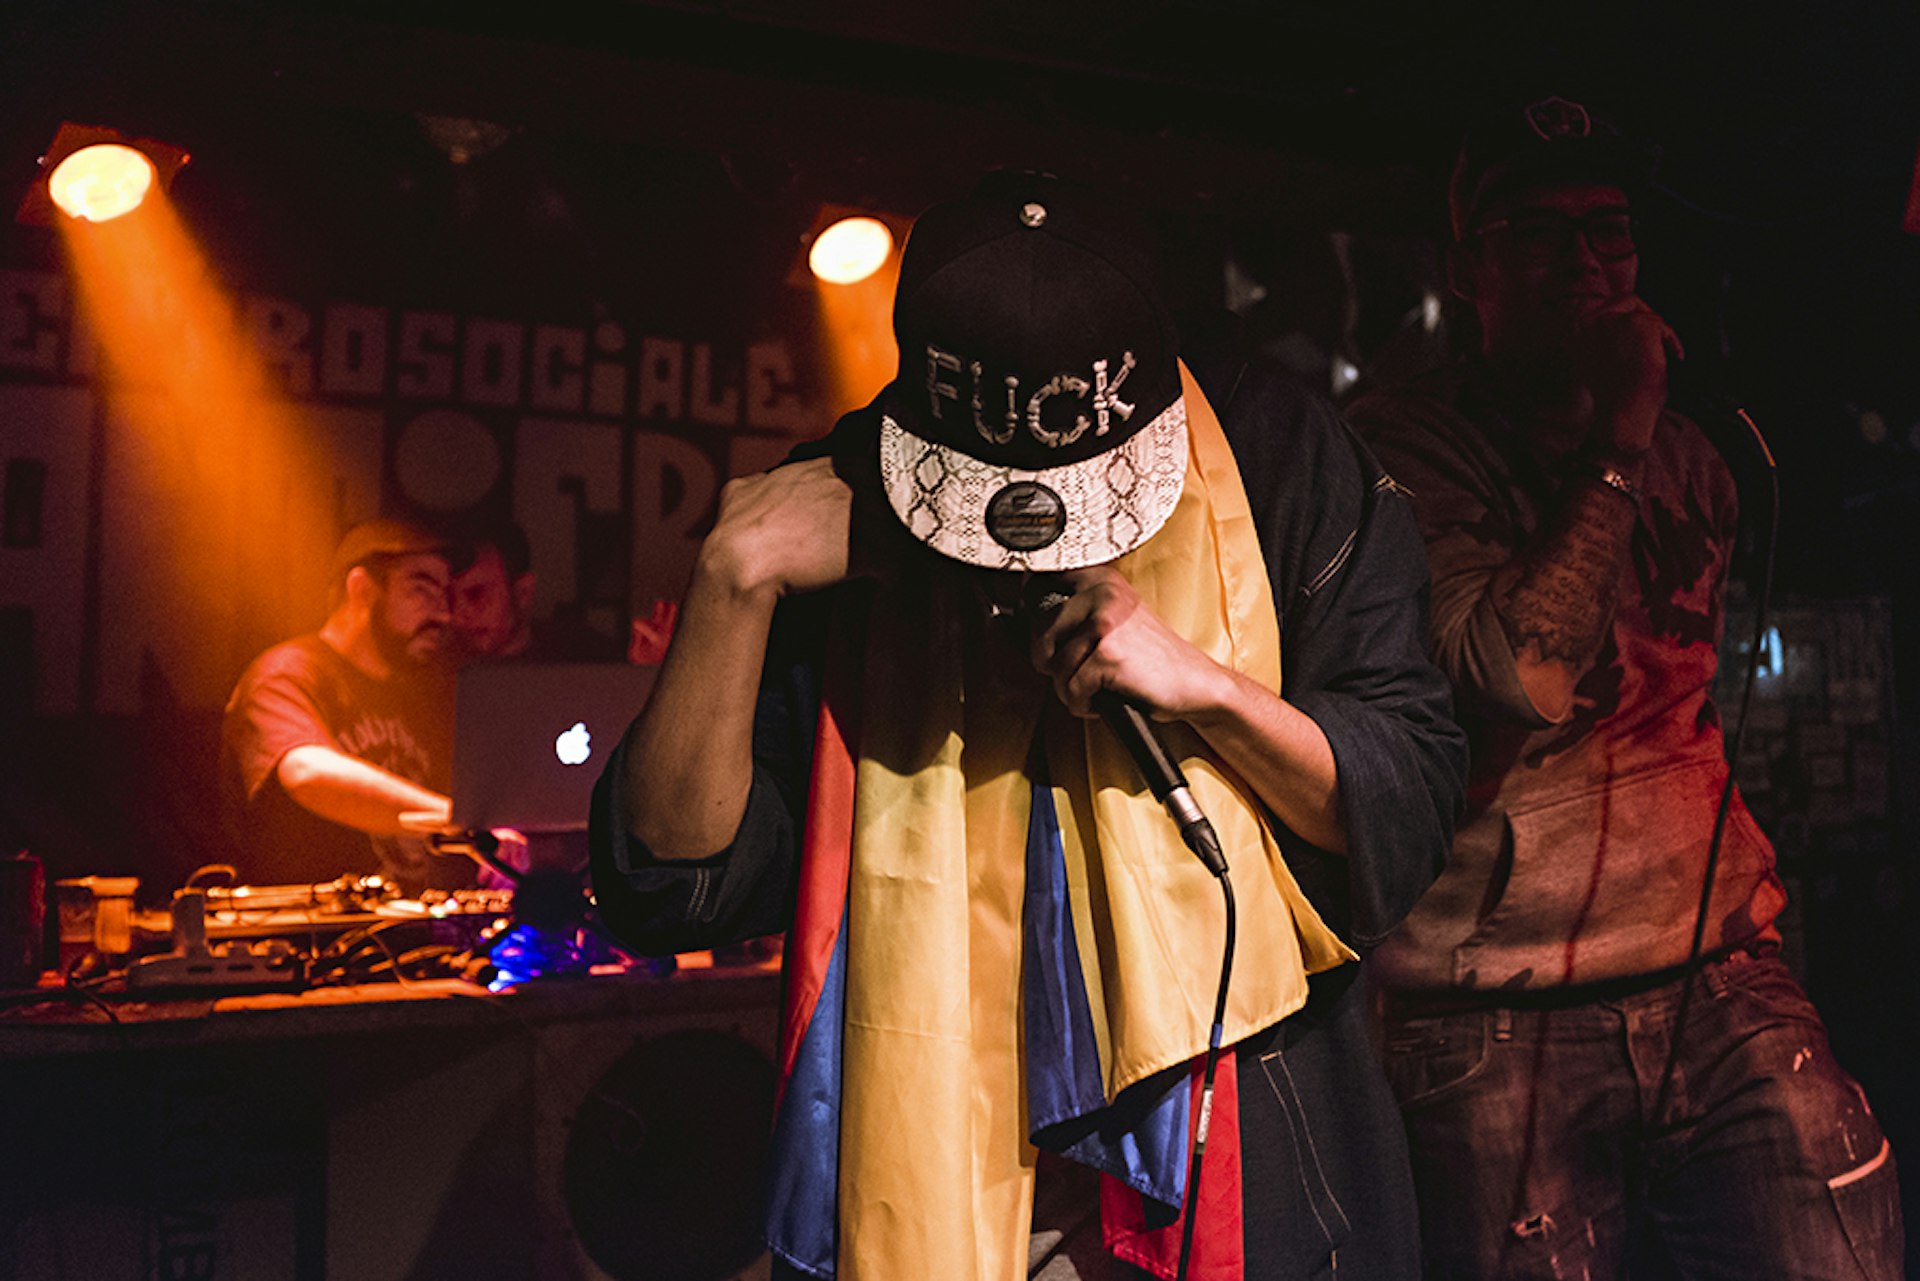 Inside the unlikely hip hop scene taking root in Italy